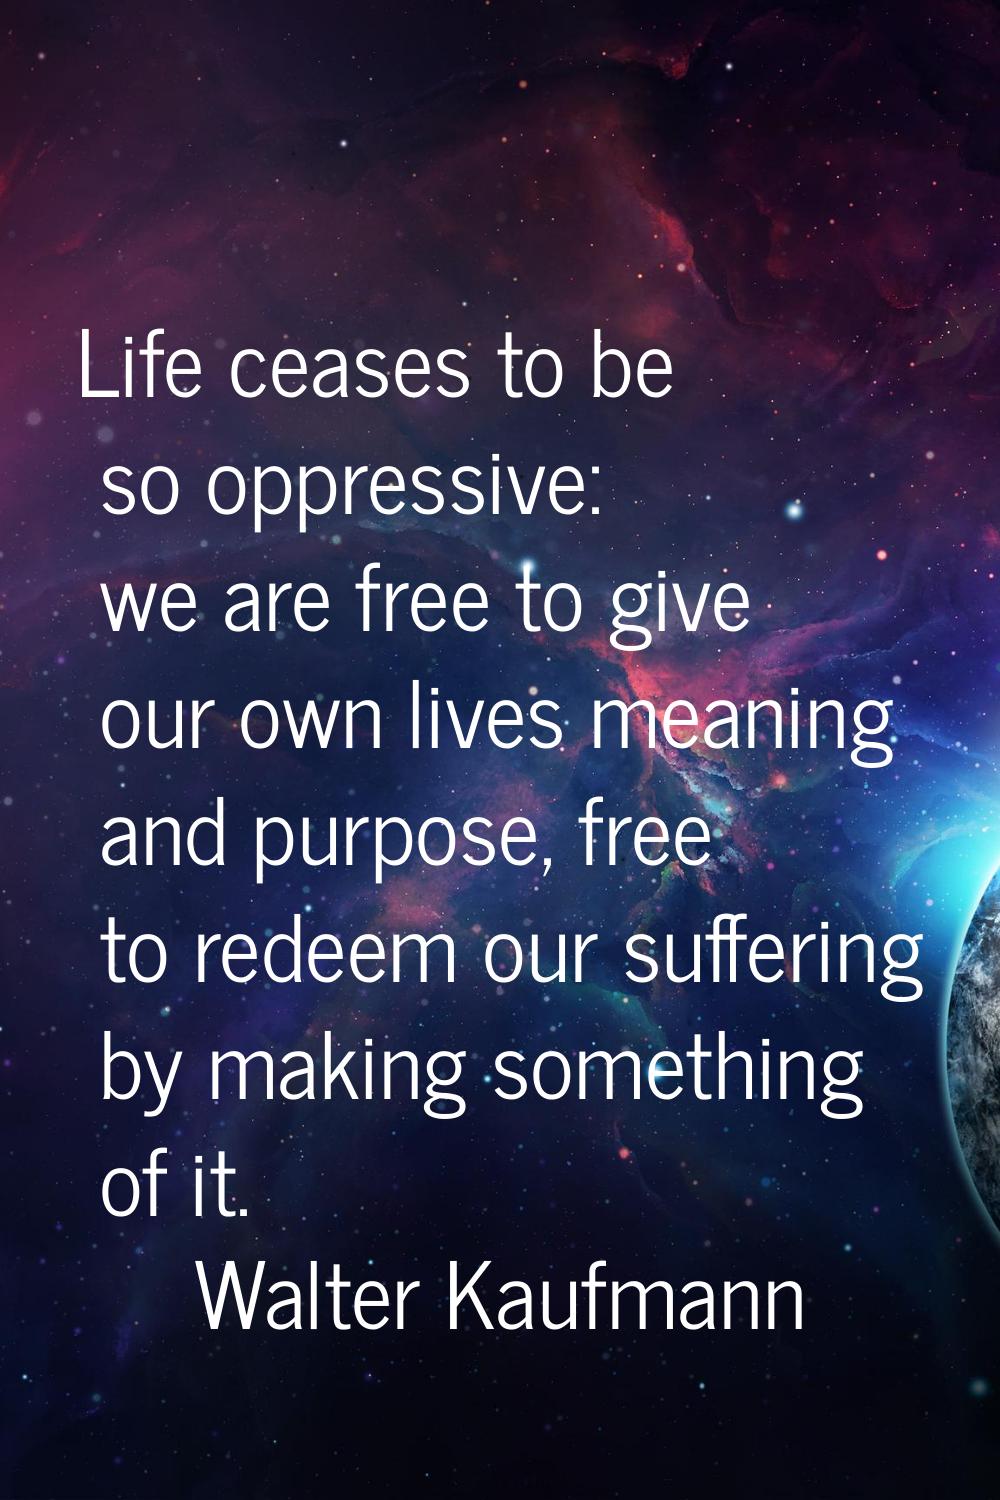 Life ceases to be so oppressive: we are free to give our own lives meaning and purpose, free to red